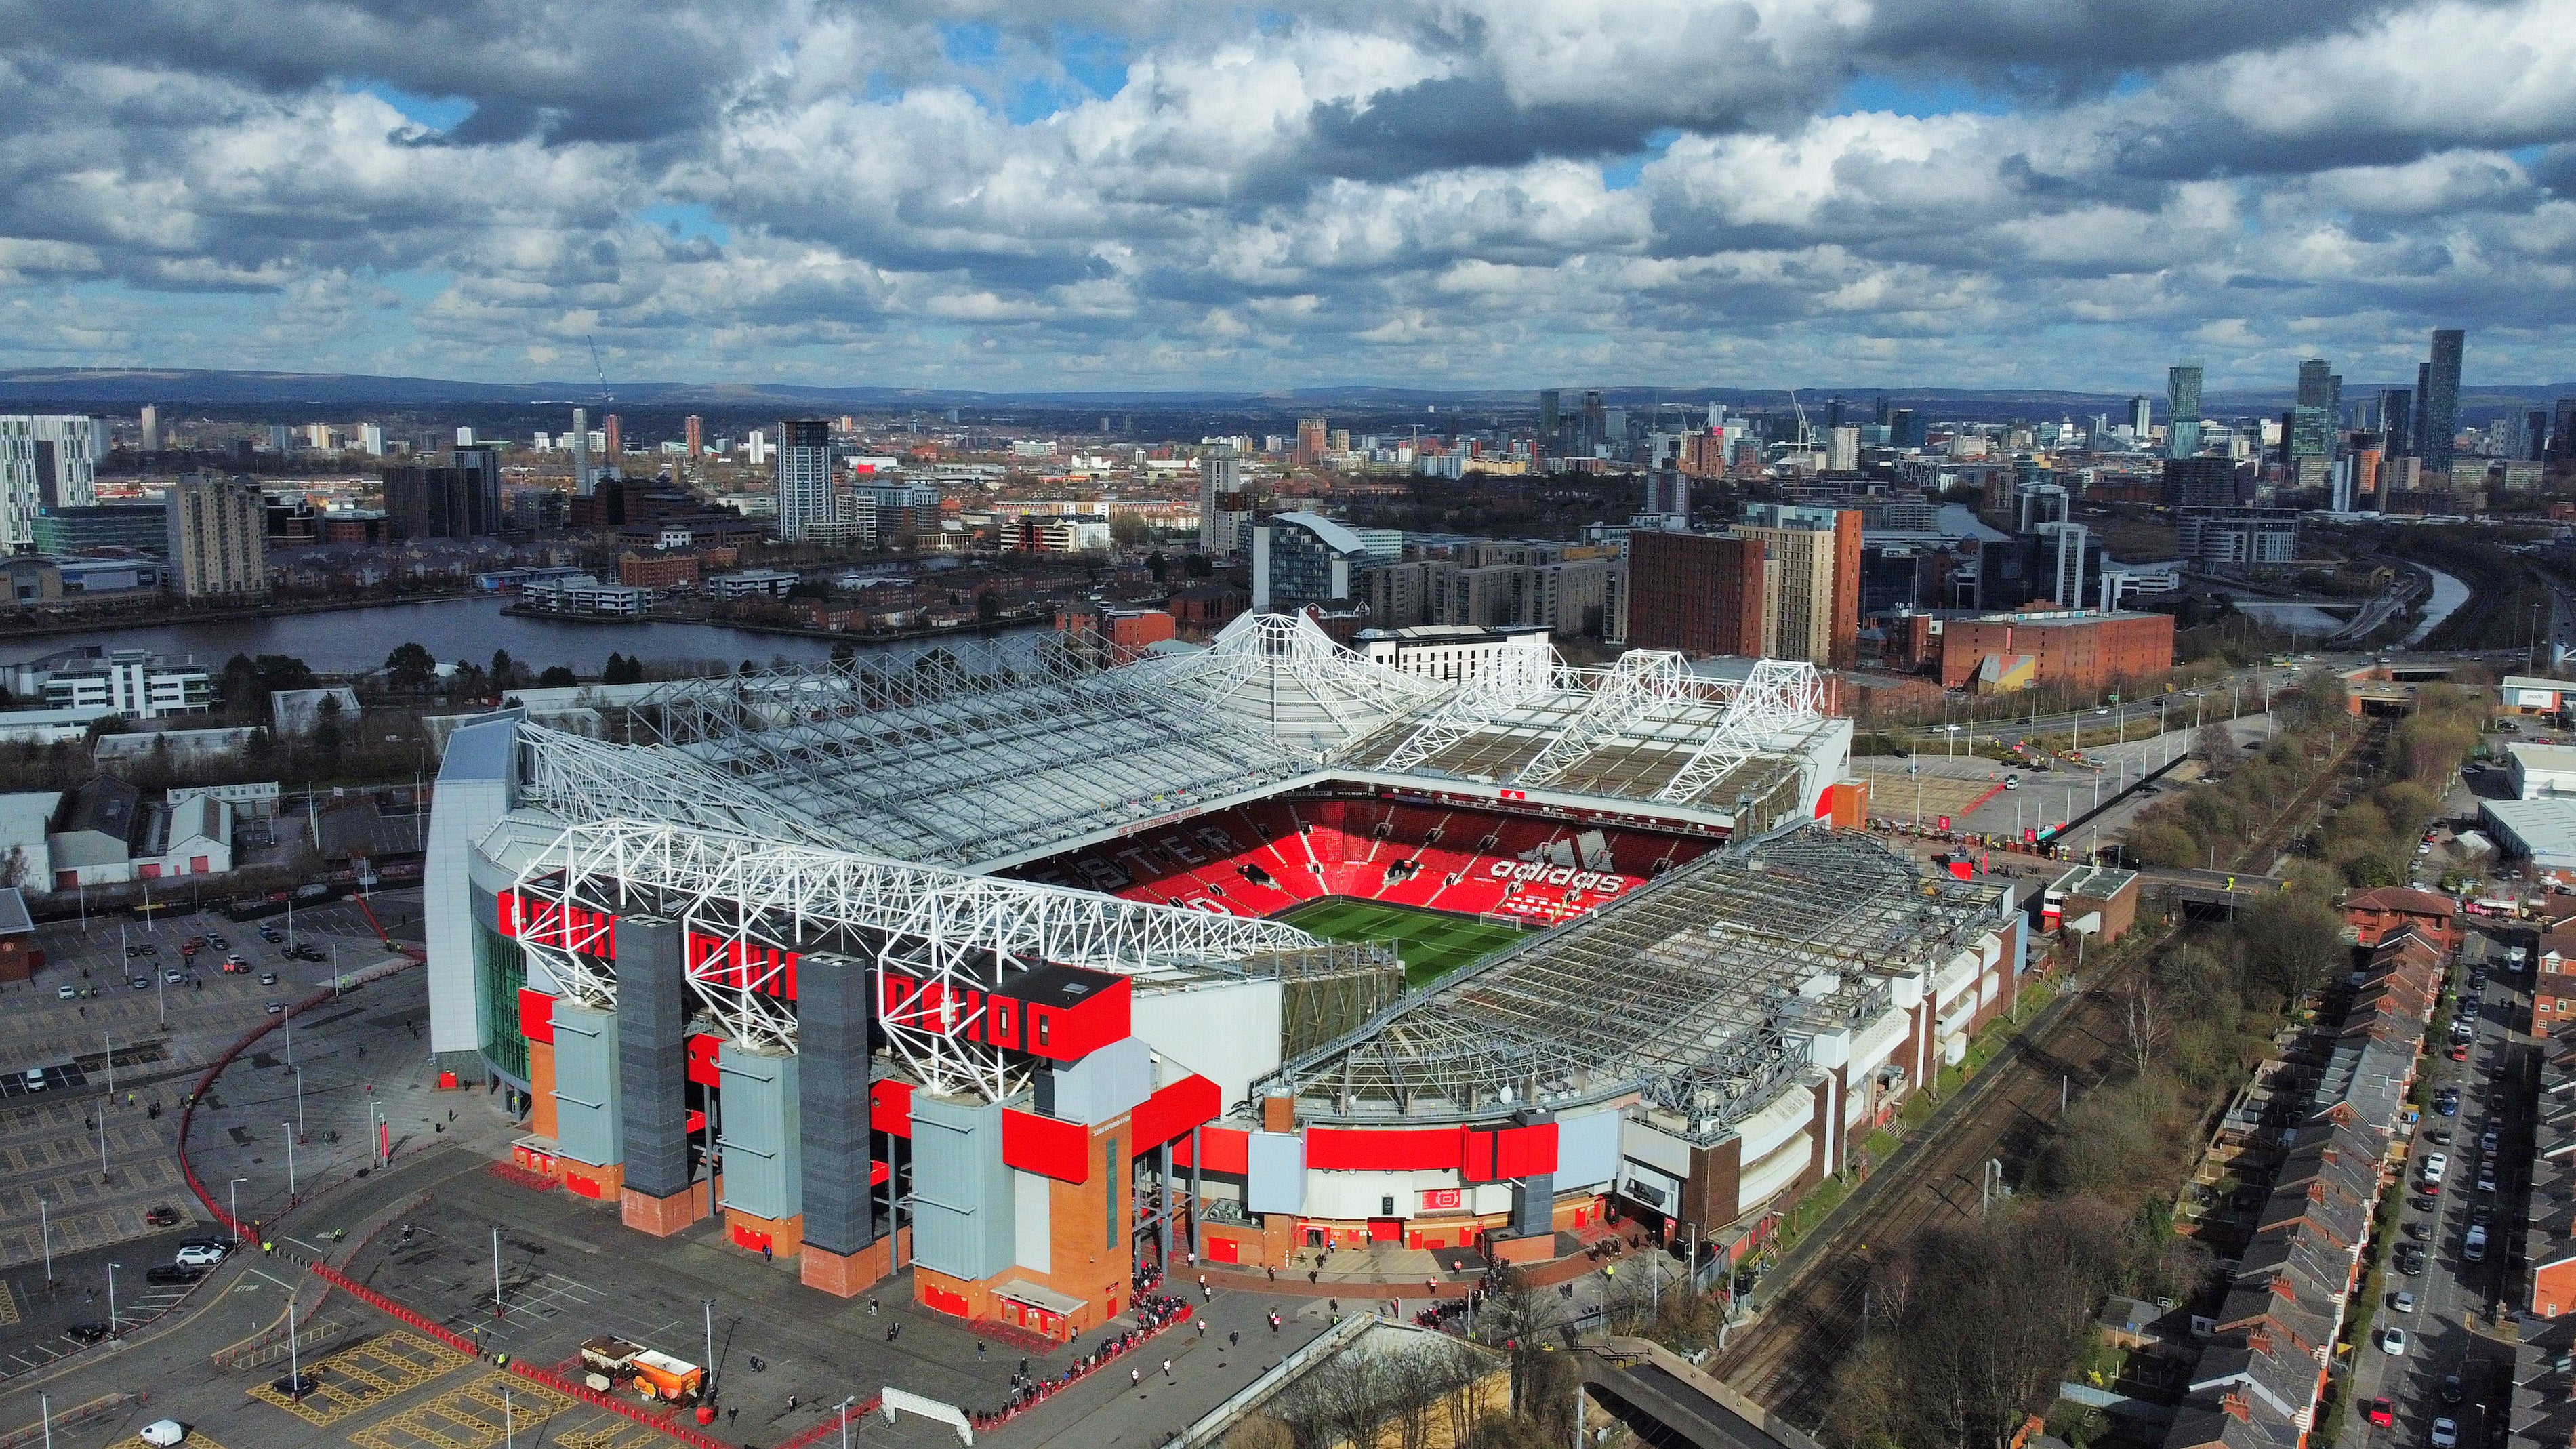 Manchester United’s home ground Old Trafford